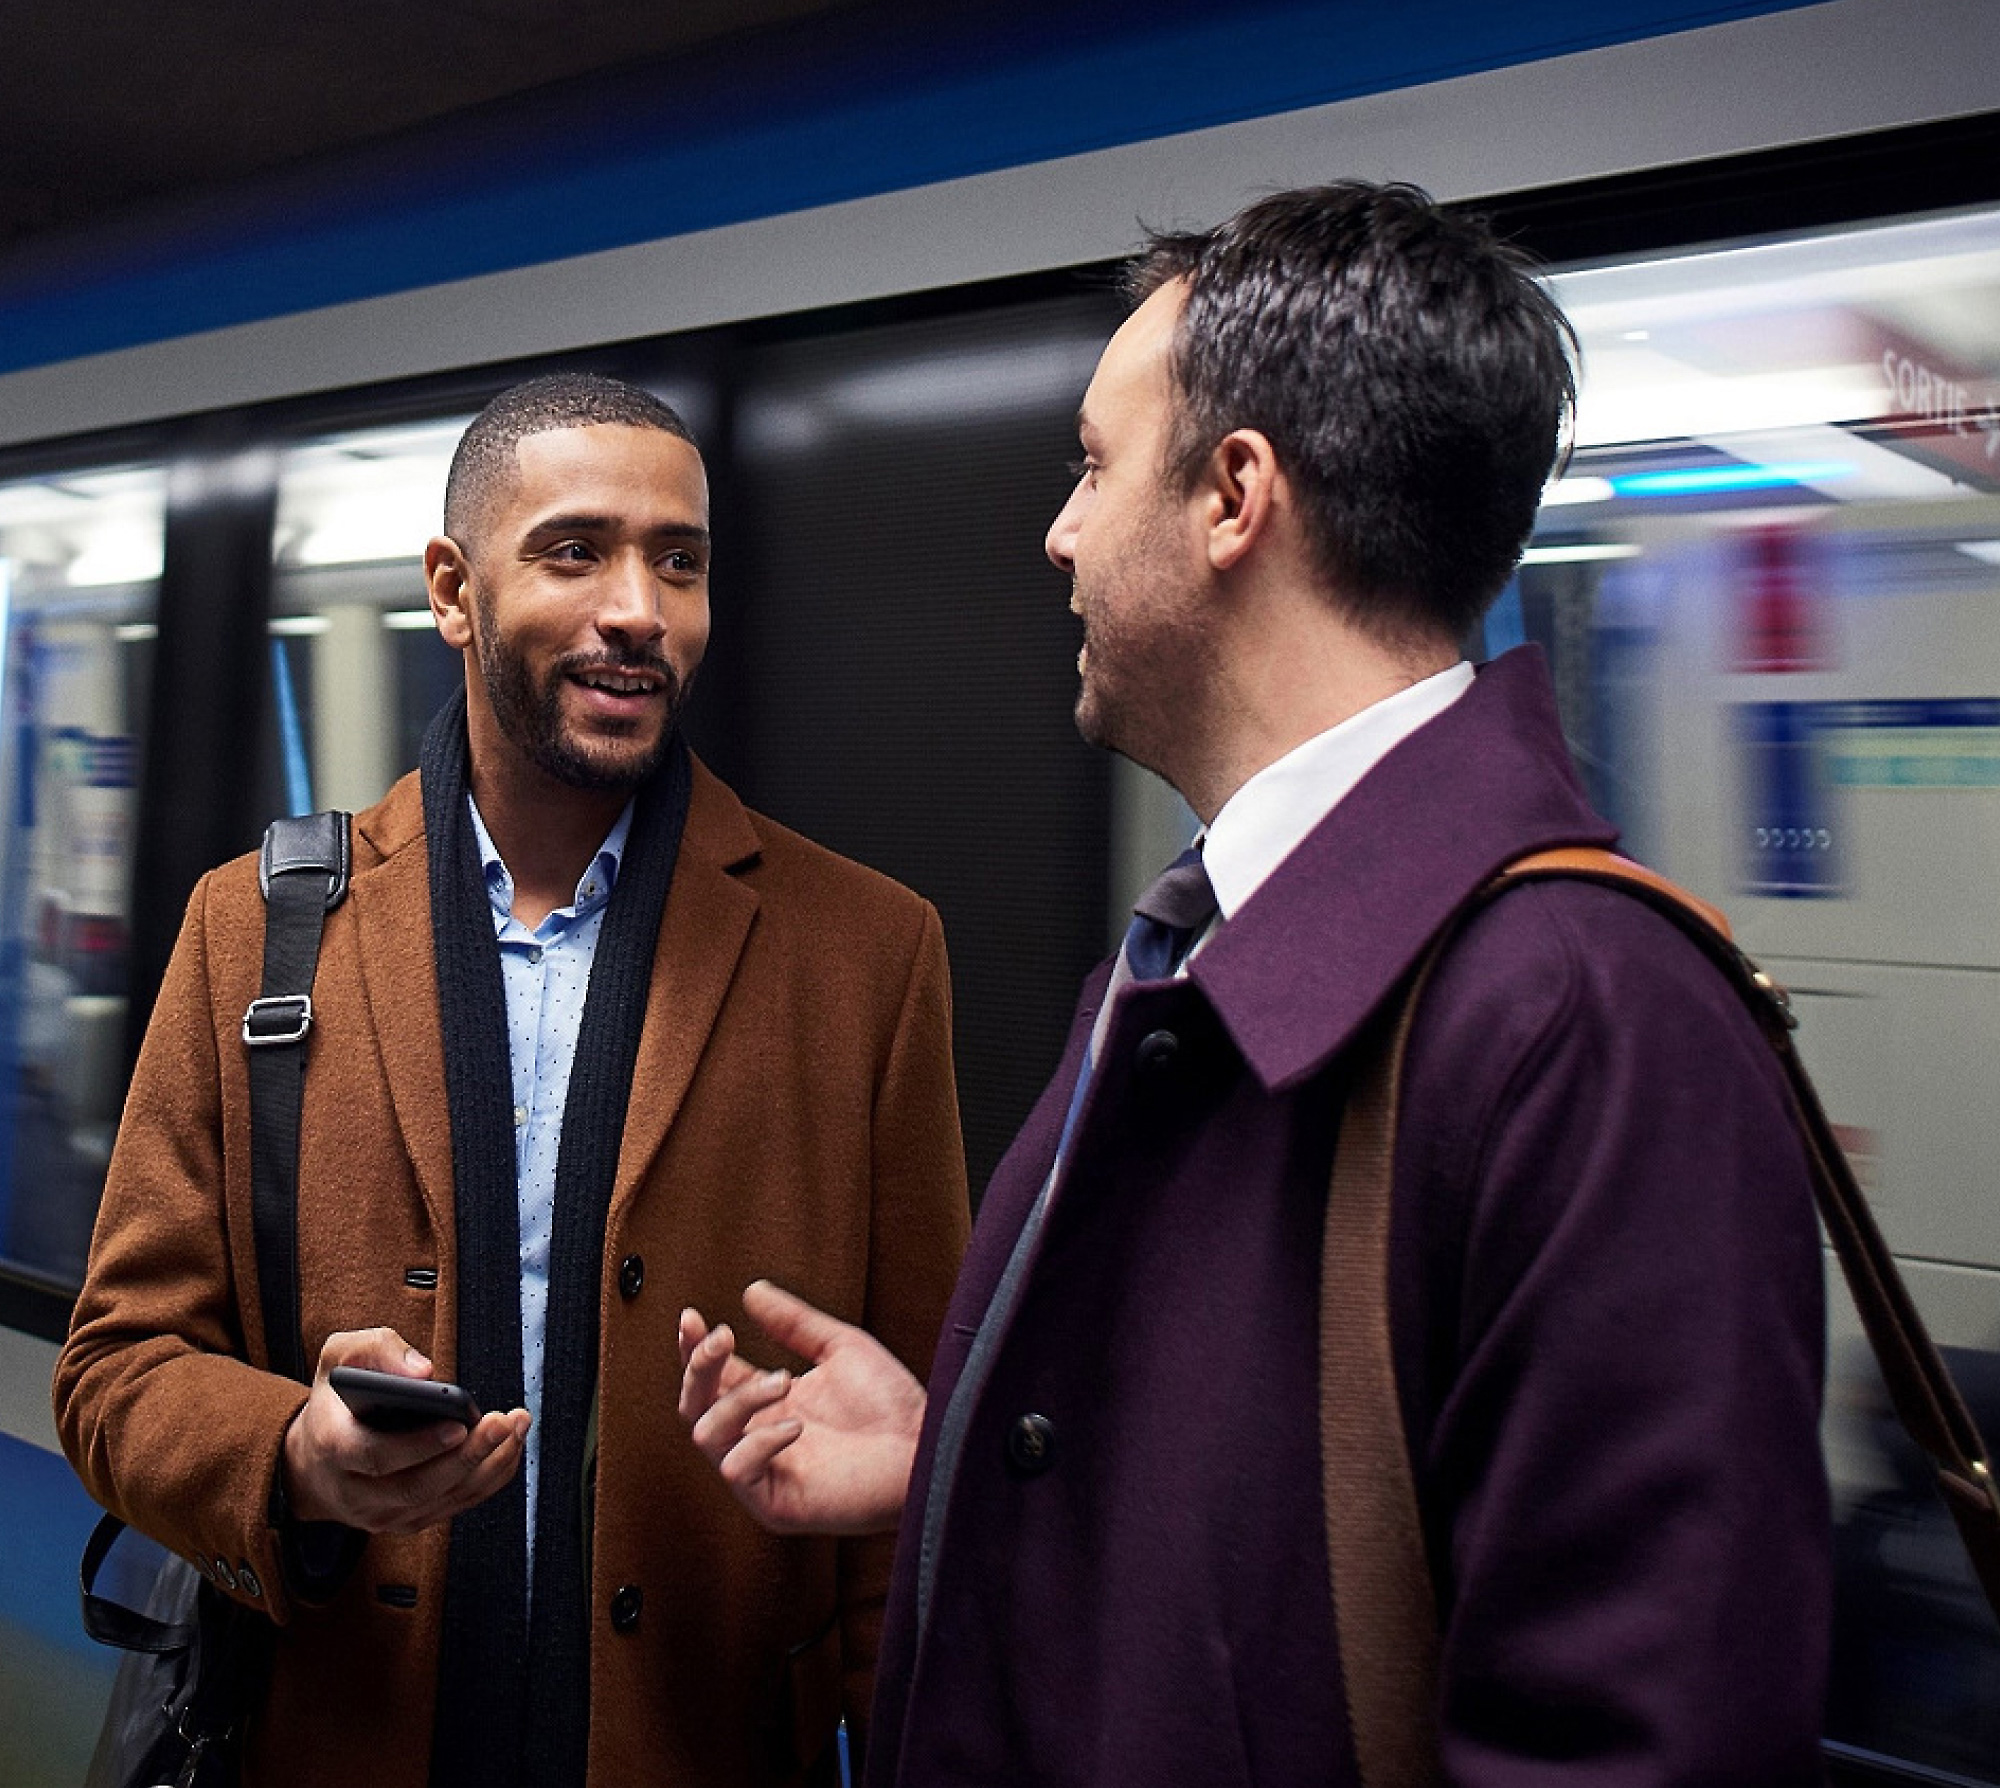 Two men conversing on a subway platform, with one holding a smartphone and a train blurred in motion behind them.